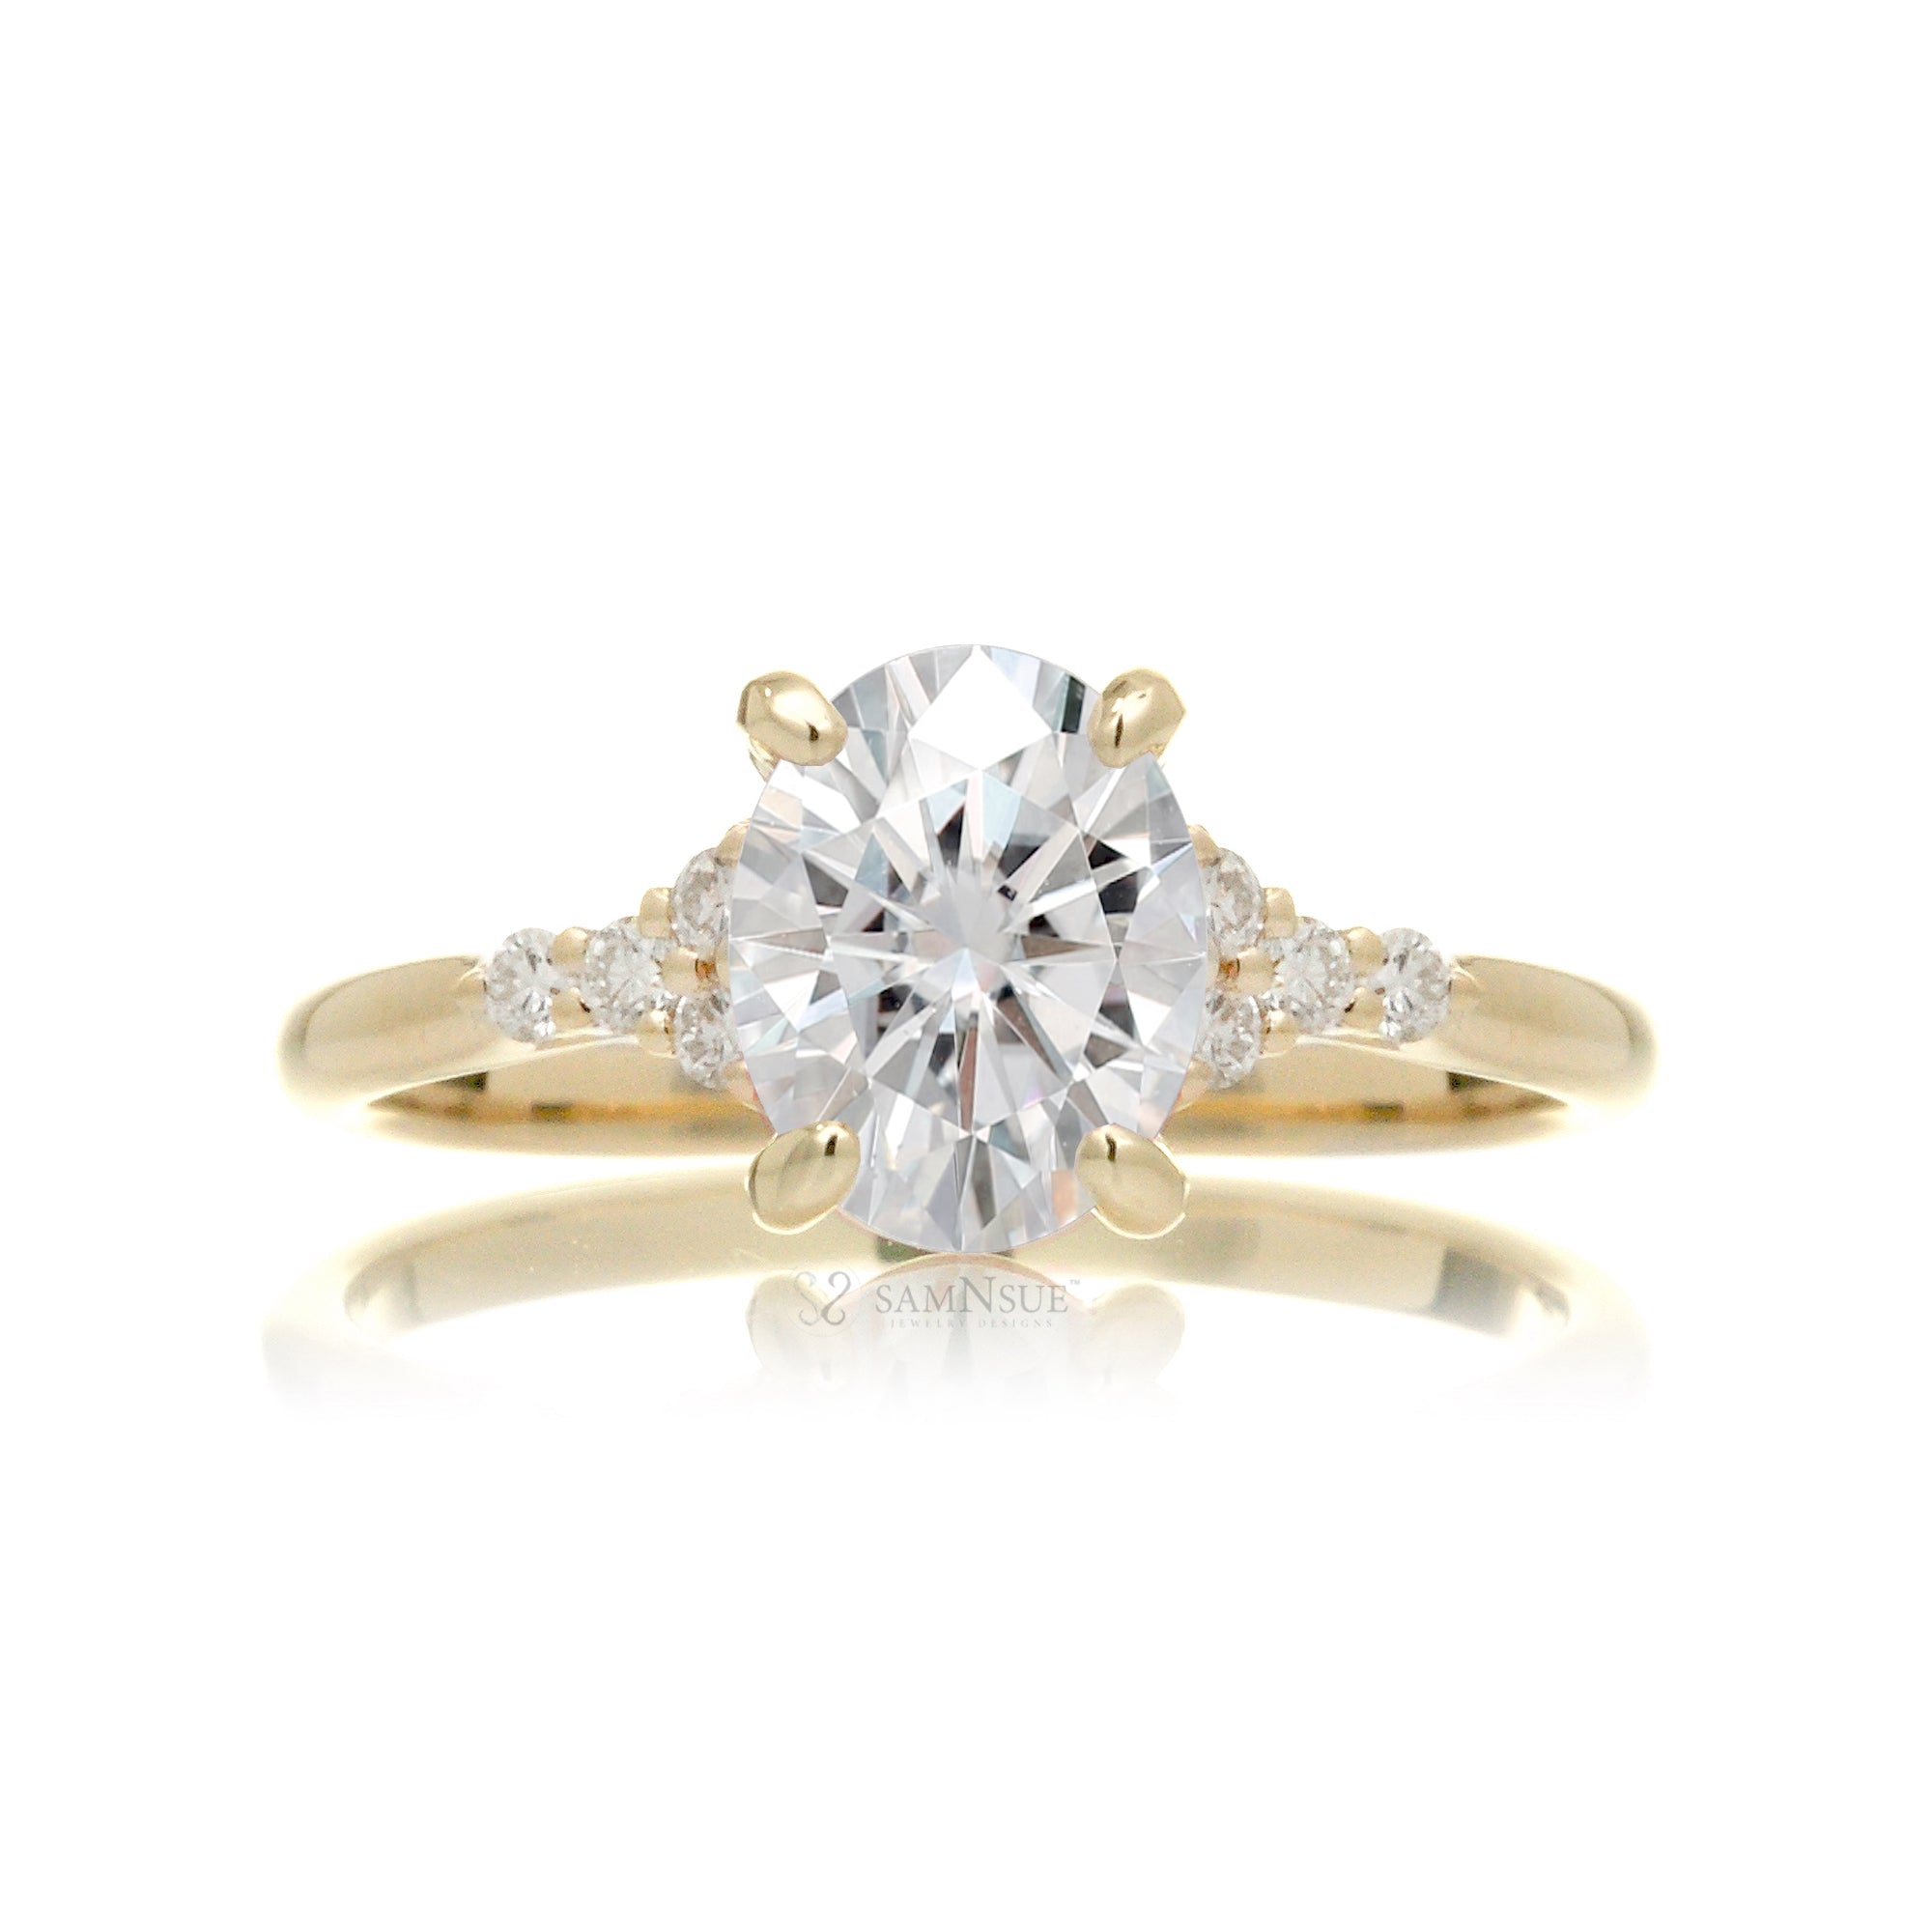 Oval moissanite ring in yellow gold with side diamonds lab-grown - the Chloe ring